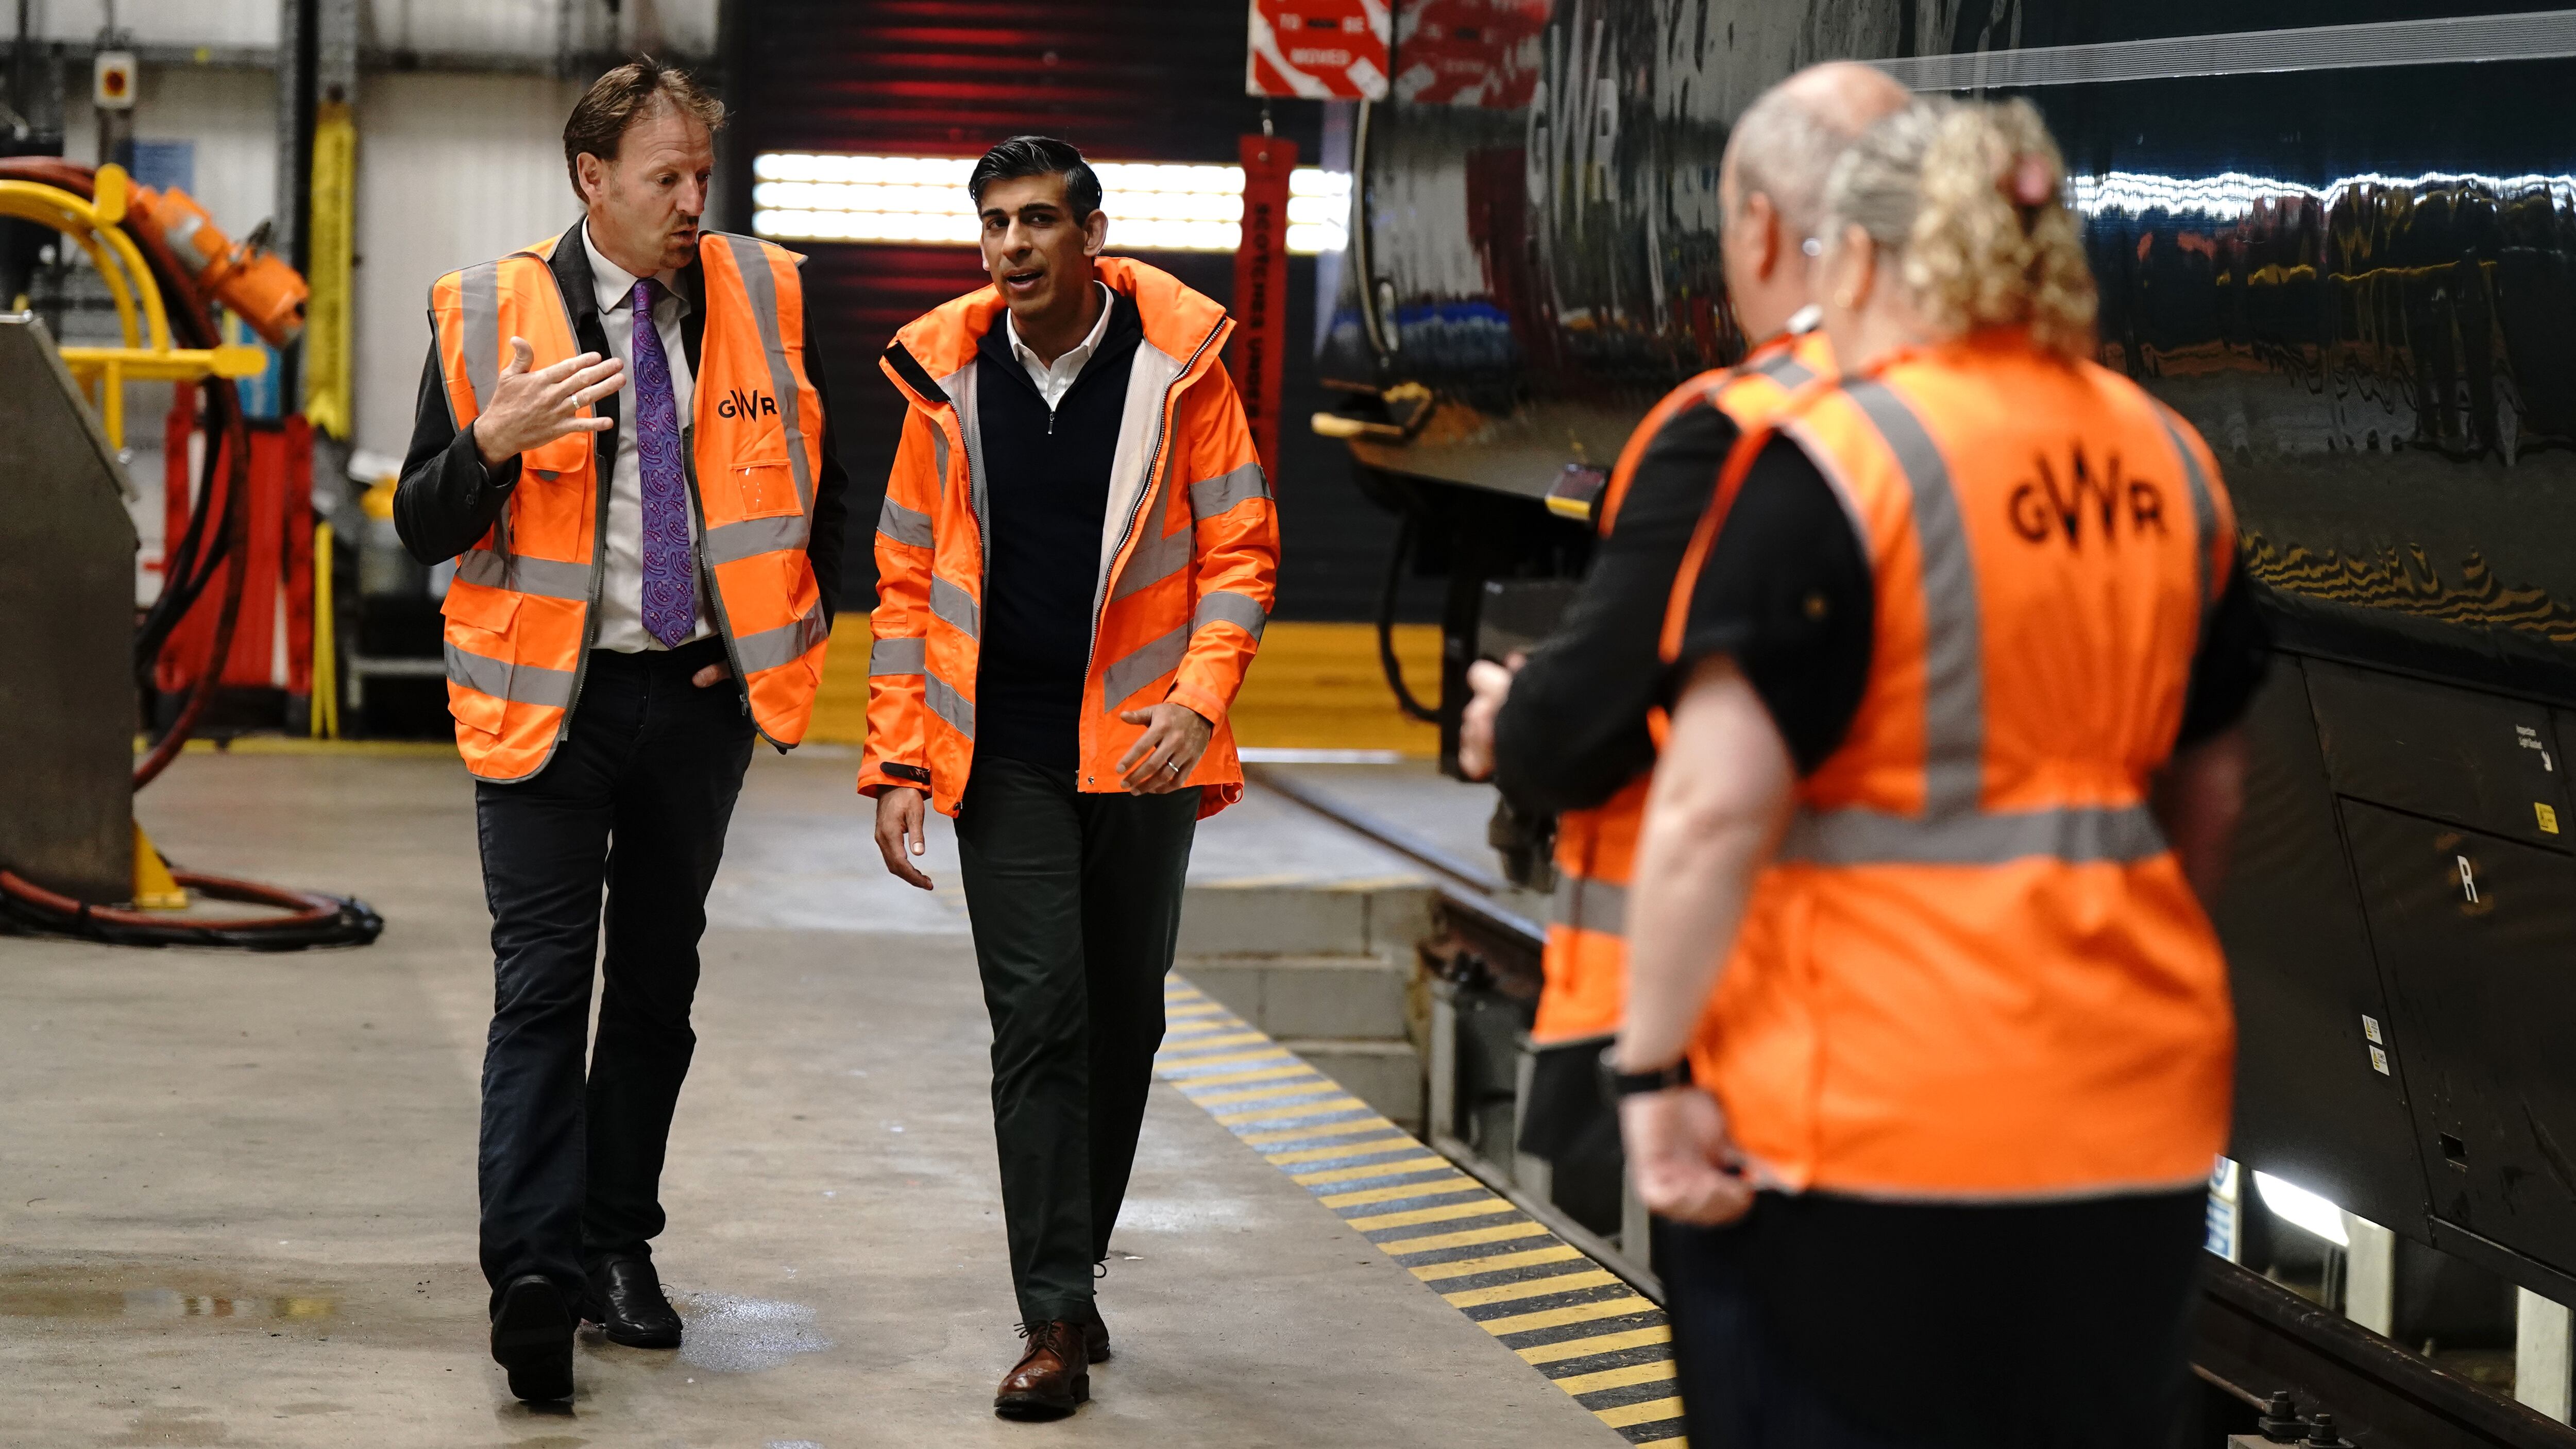 Prime Minister Rishi Sunak has promised to create 100,000 more apprenticeships a year by axing some ‘rip-off’ university degrees